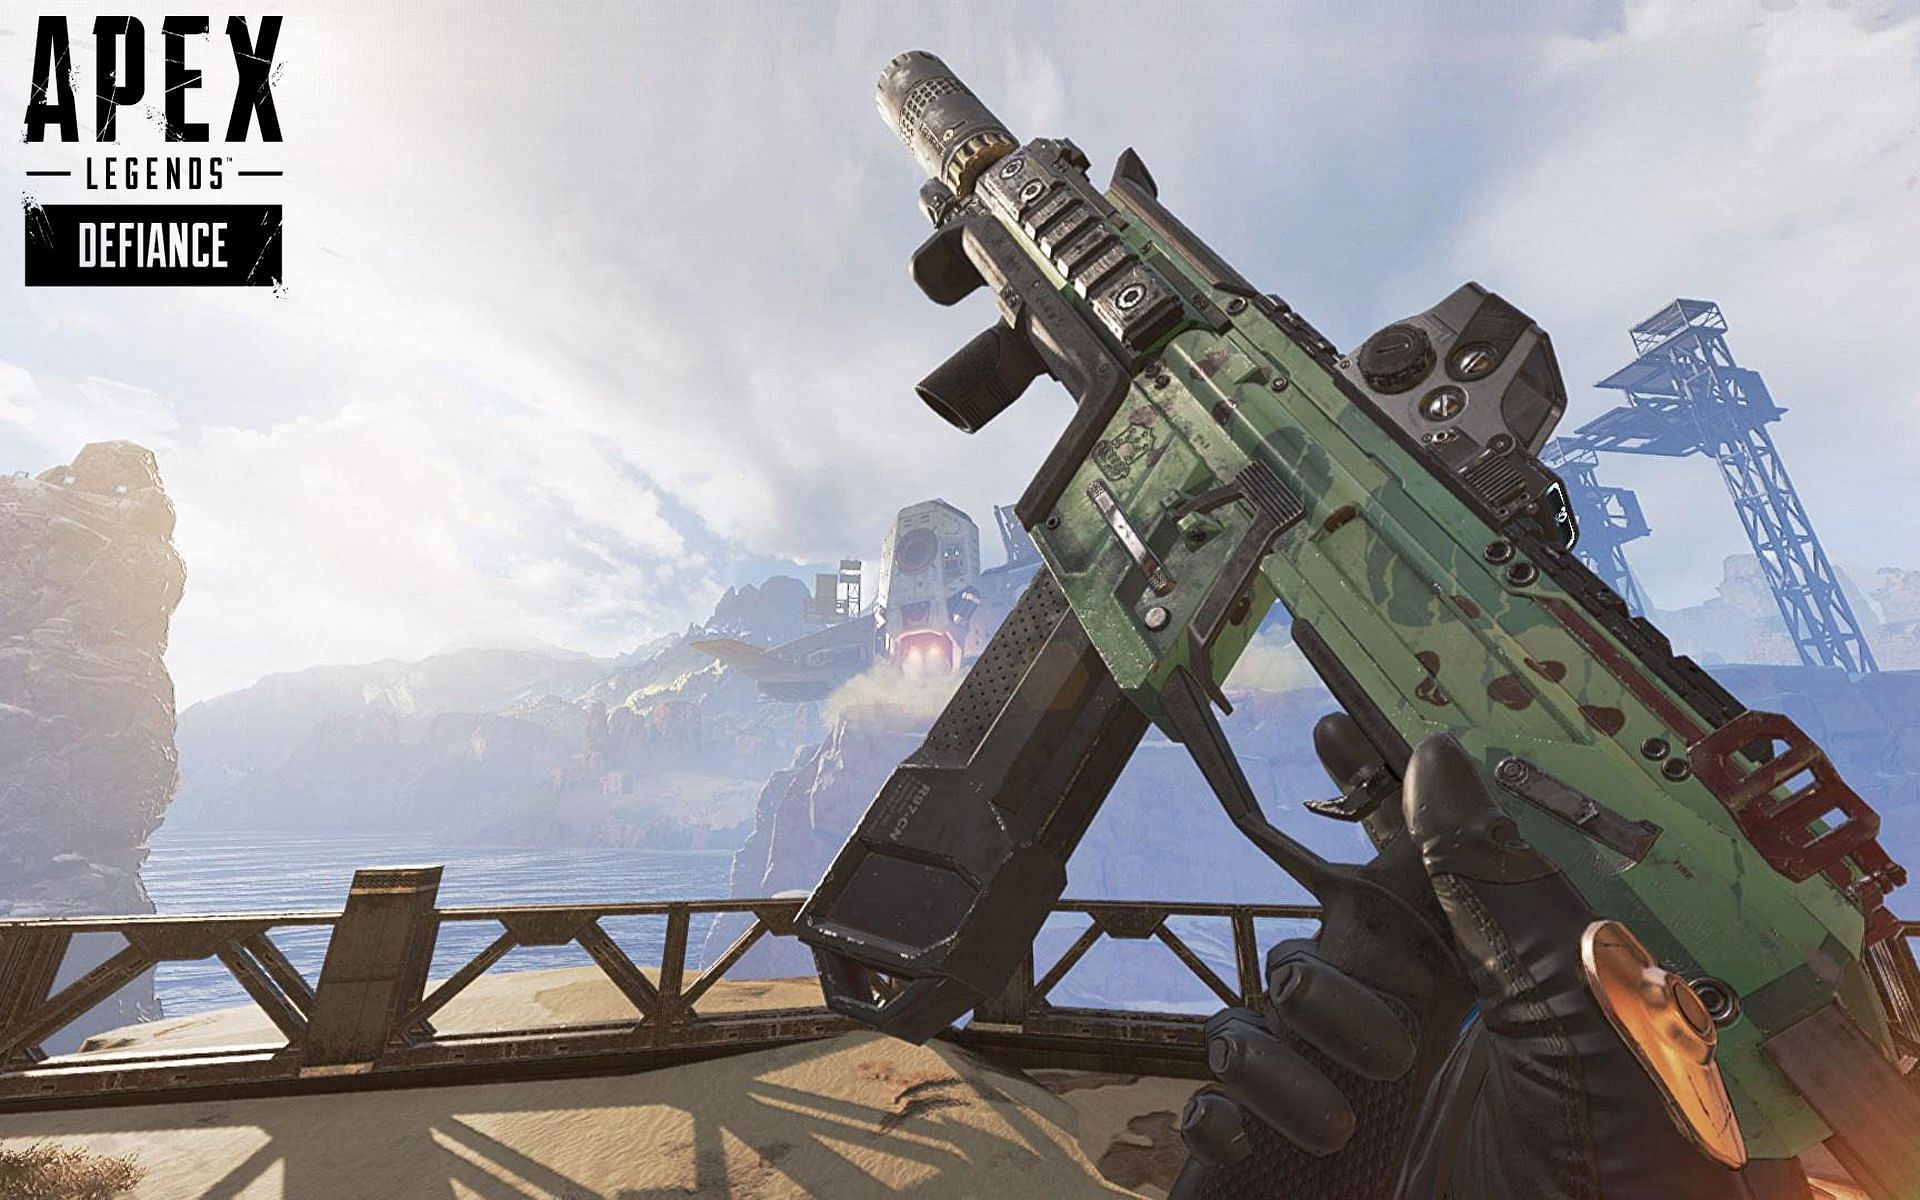 SMGs in Apex Legends got mistakenly nerfed in Season 12 (Image via Respawn Entertainment)